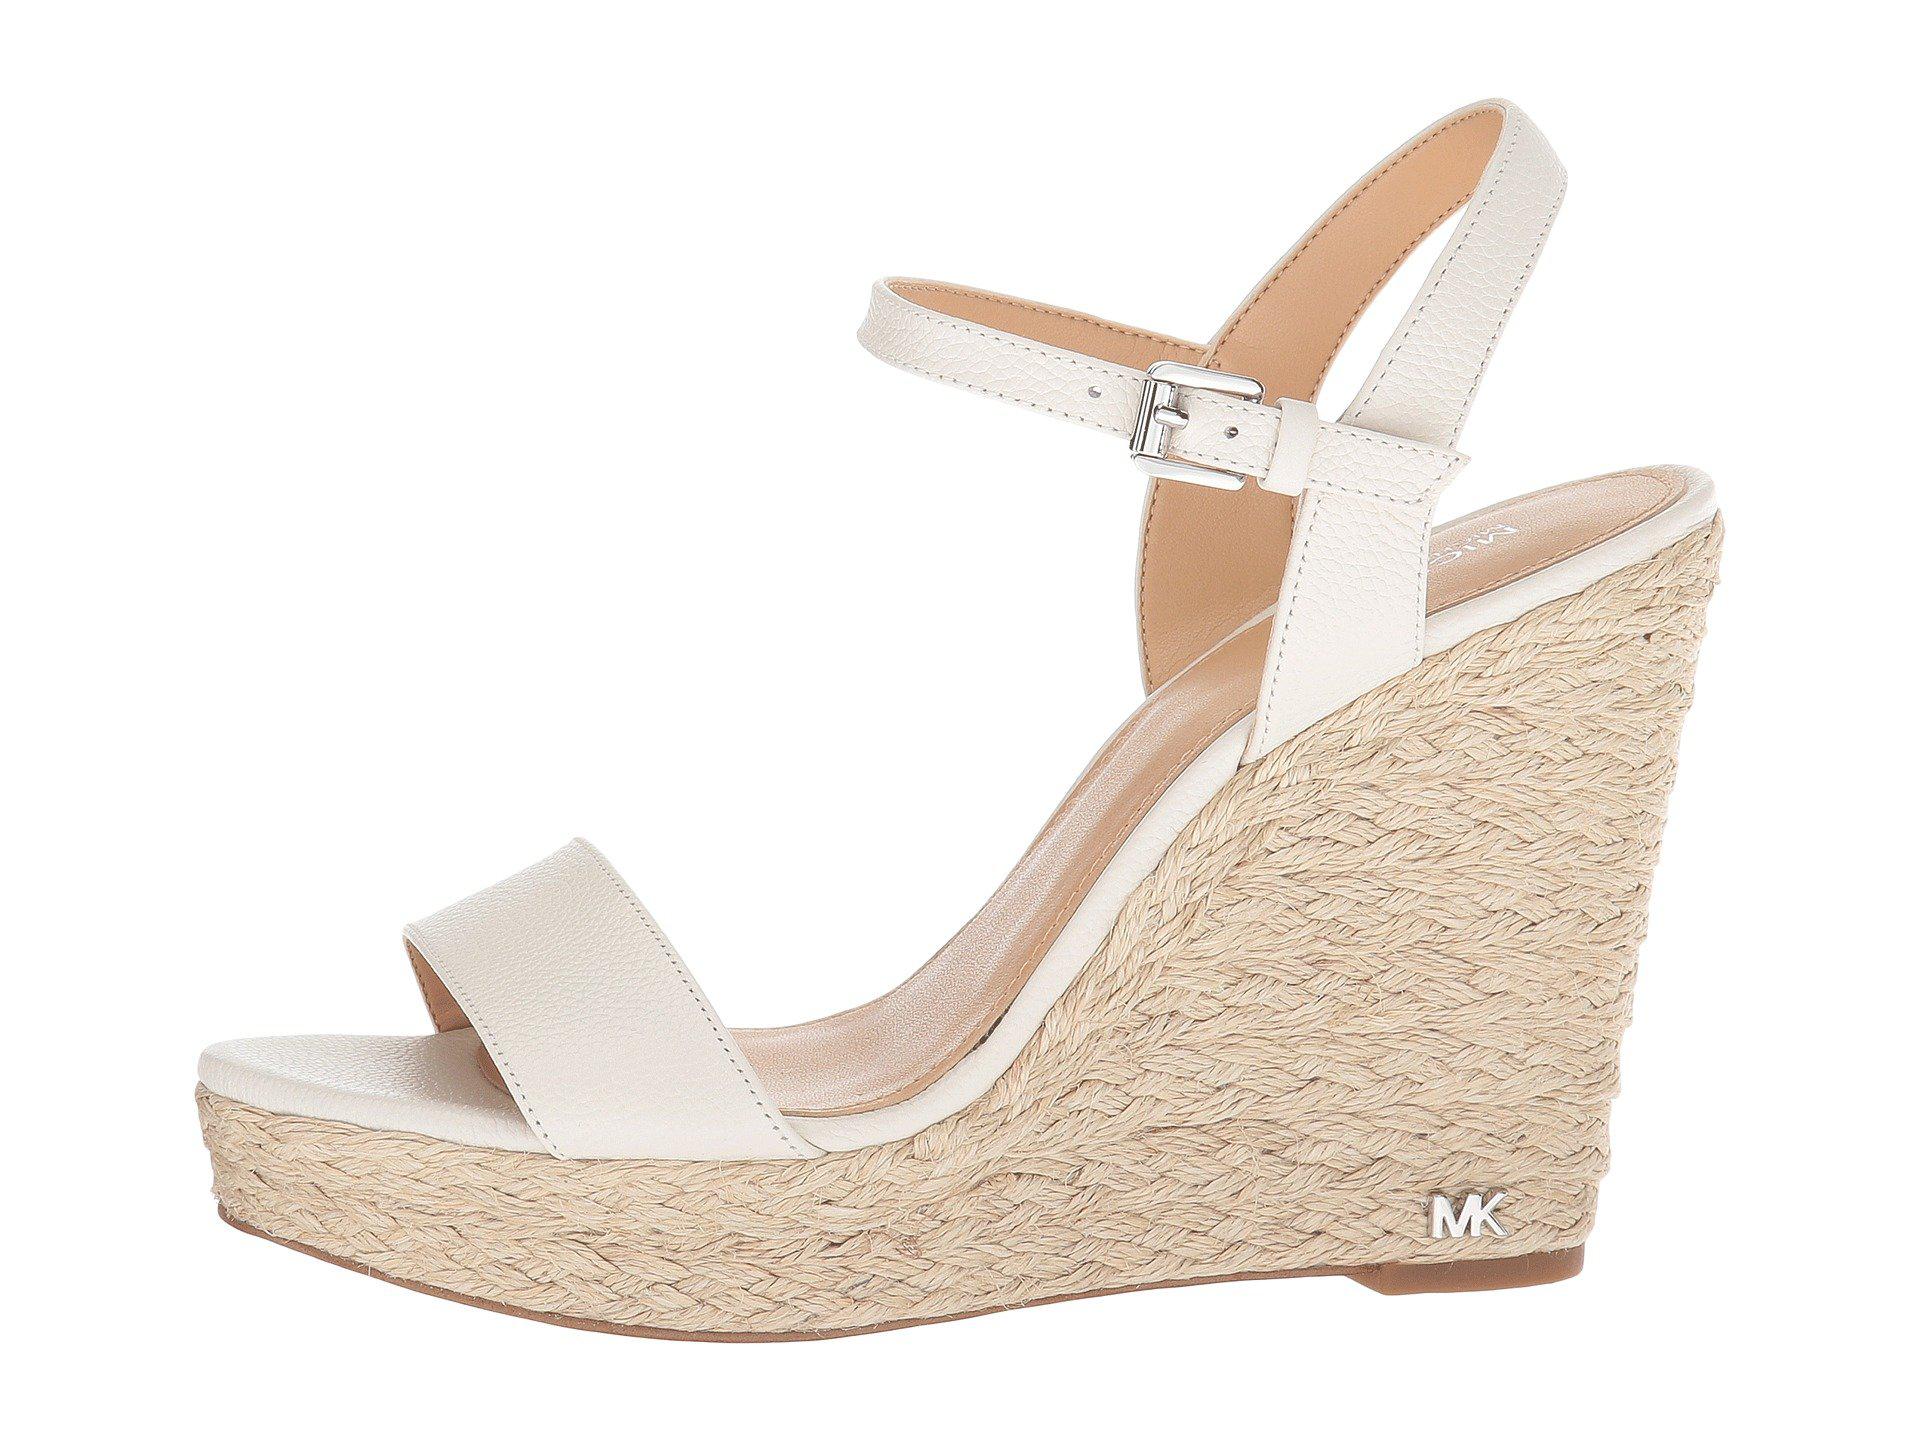 MICHAEL Michael Kors Leather Jill Espadrille Wedges in White - Lyst